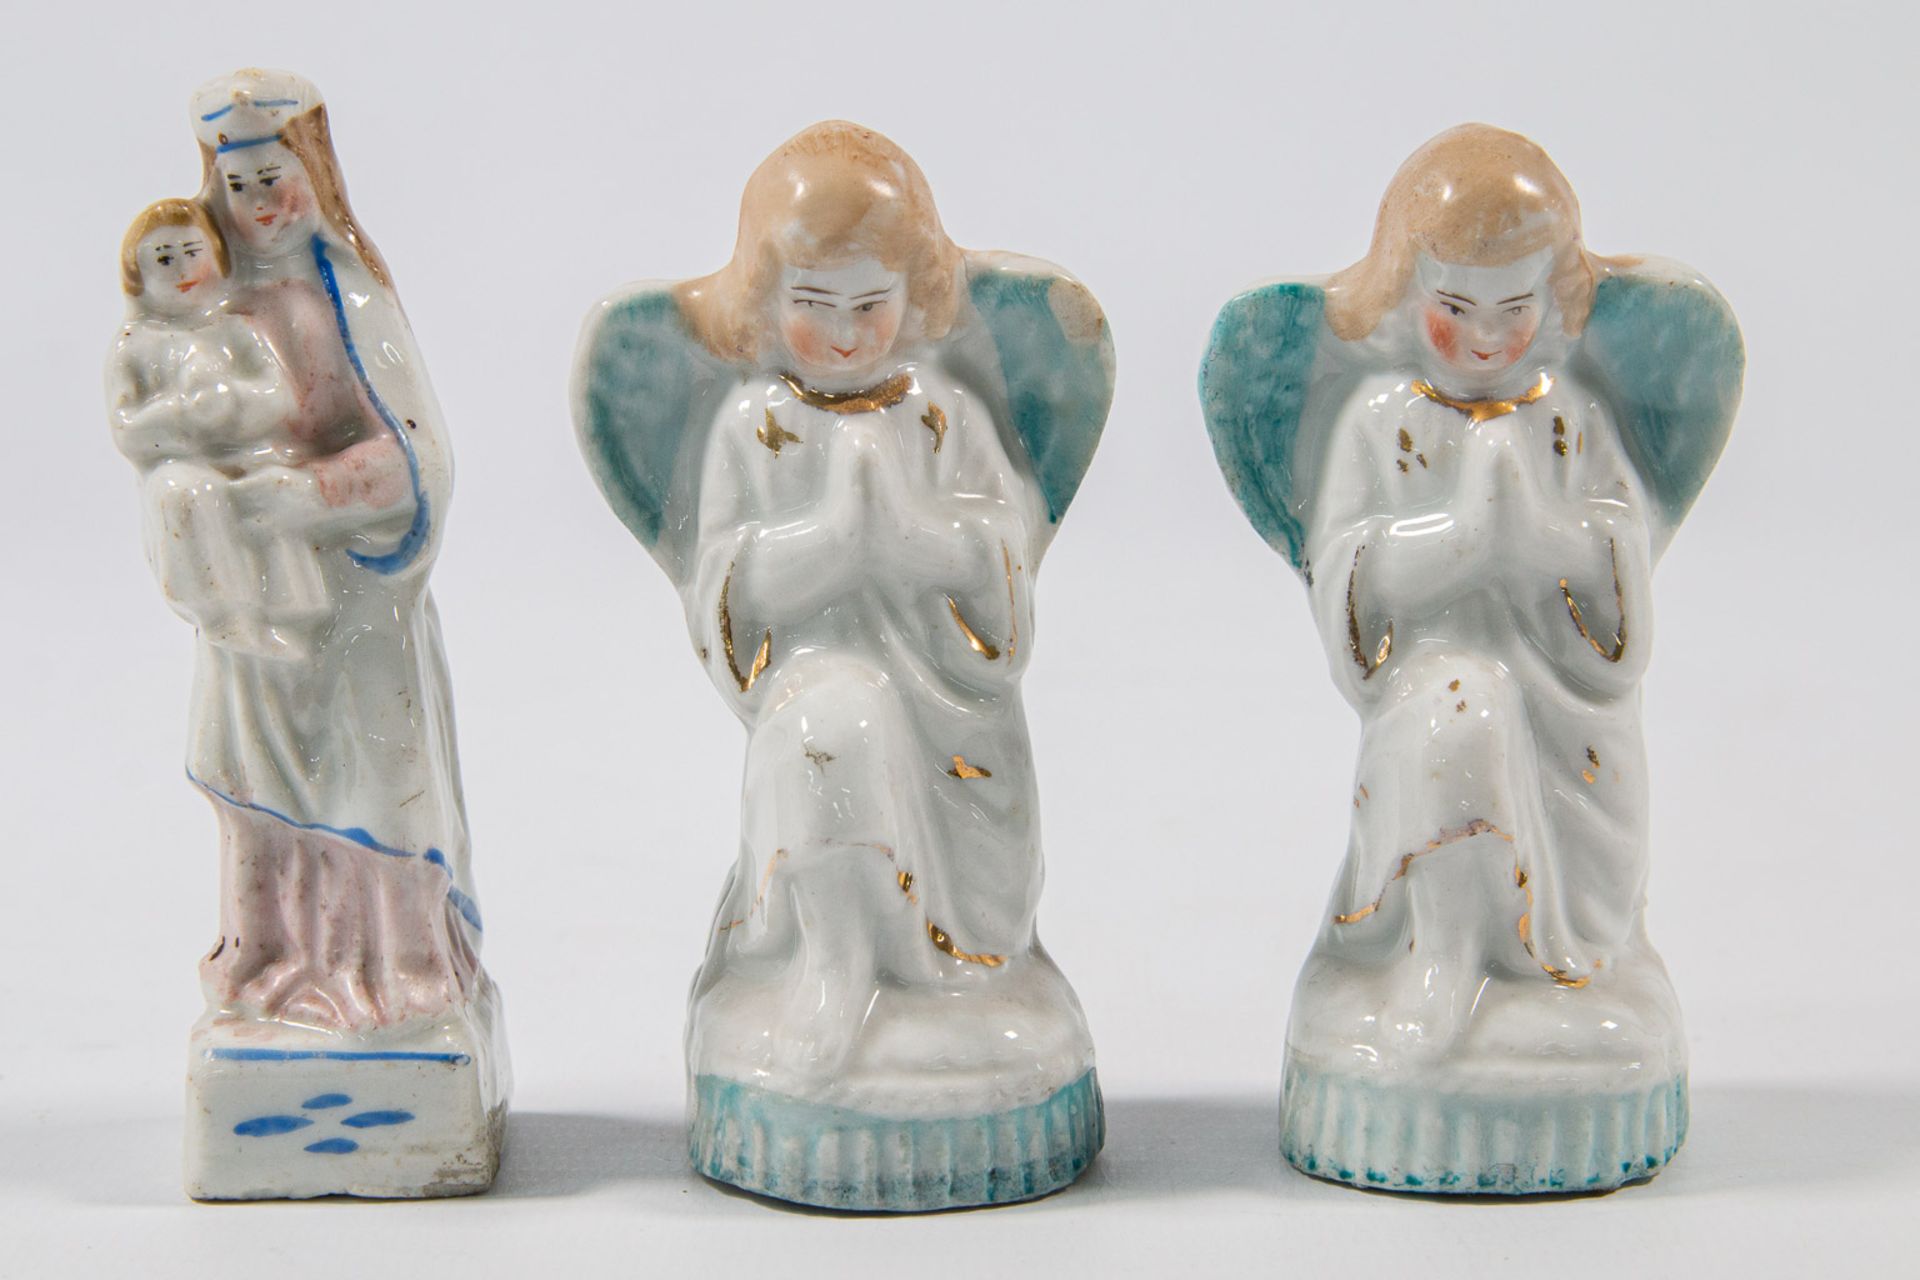 A collection of 11 bisque porcelain holy statues, Mary, Joseph, and Madonna. - Image 40 of 49